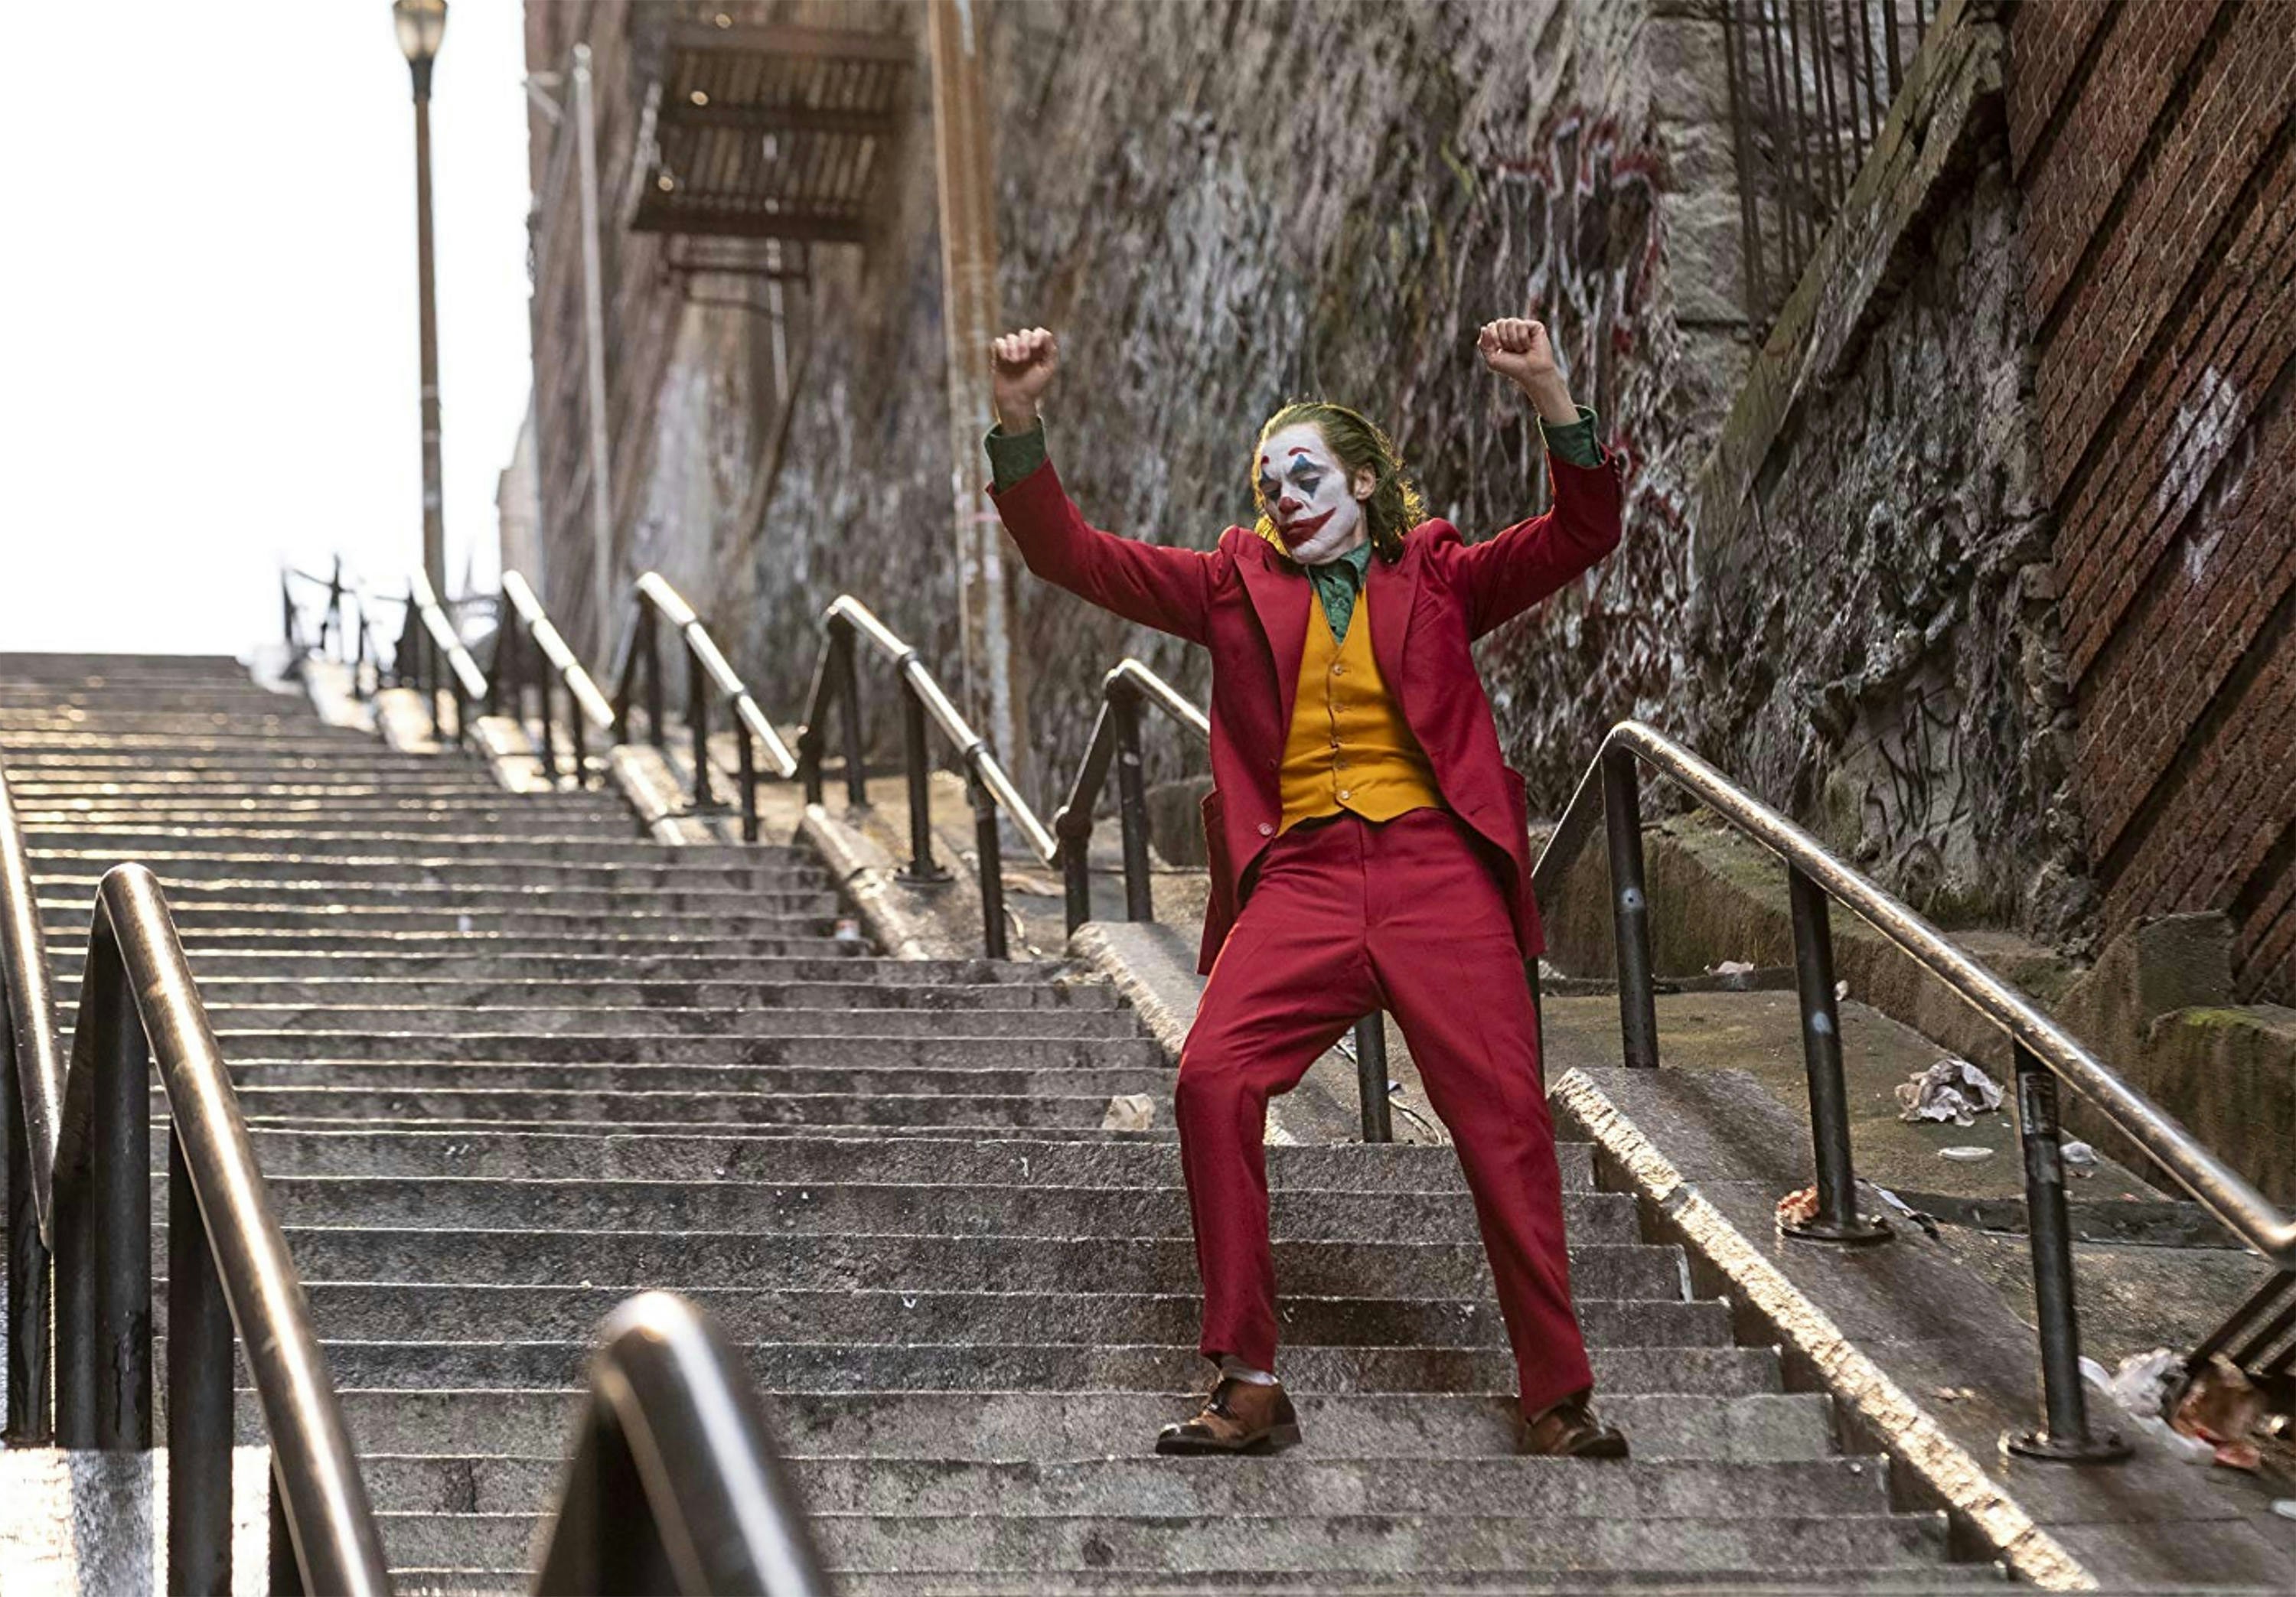 A still from the movie 'Joker': the Joker is dancing down a flight of concrete steps in New York.